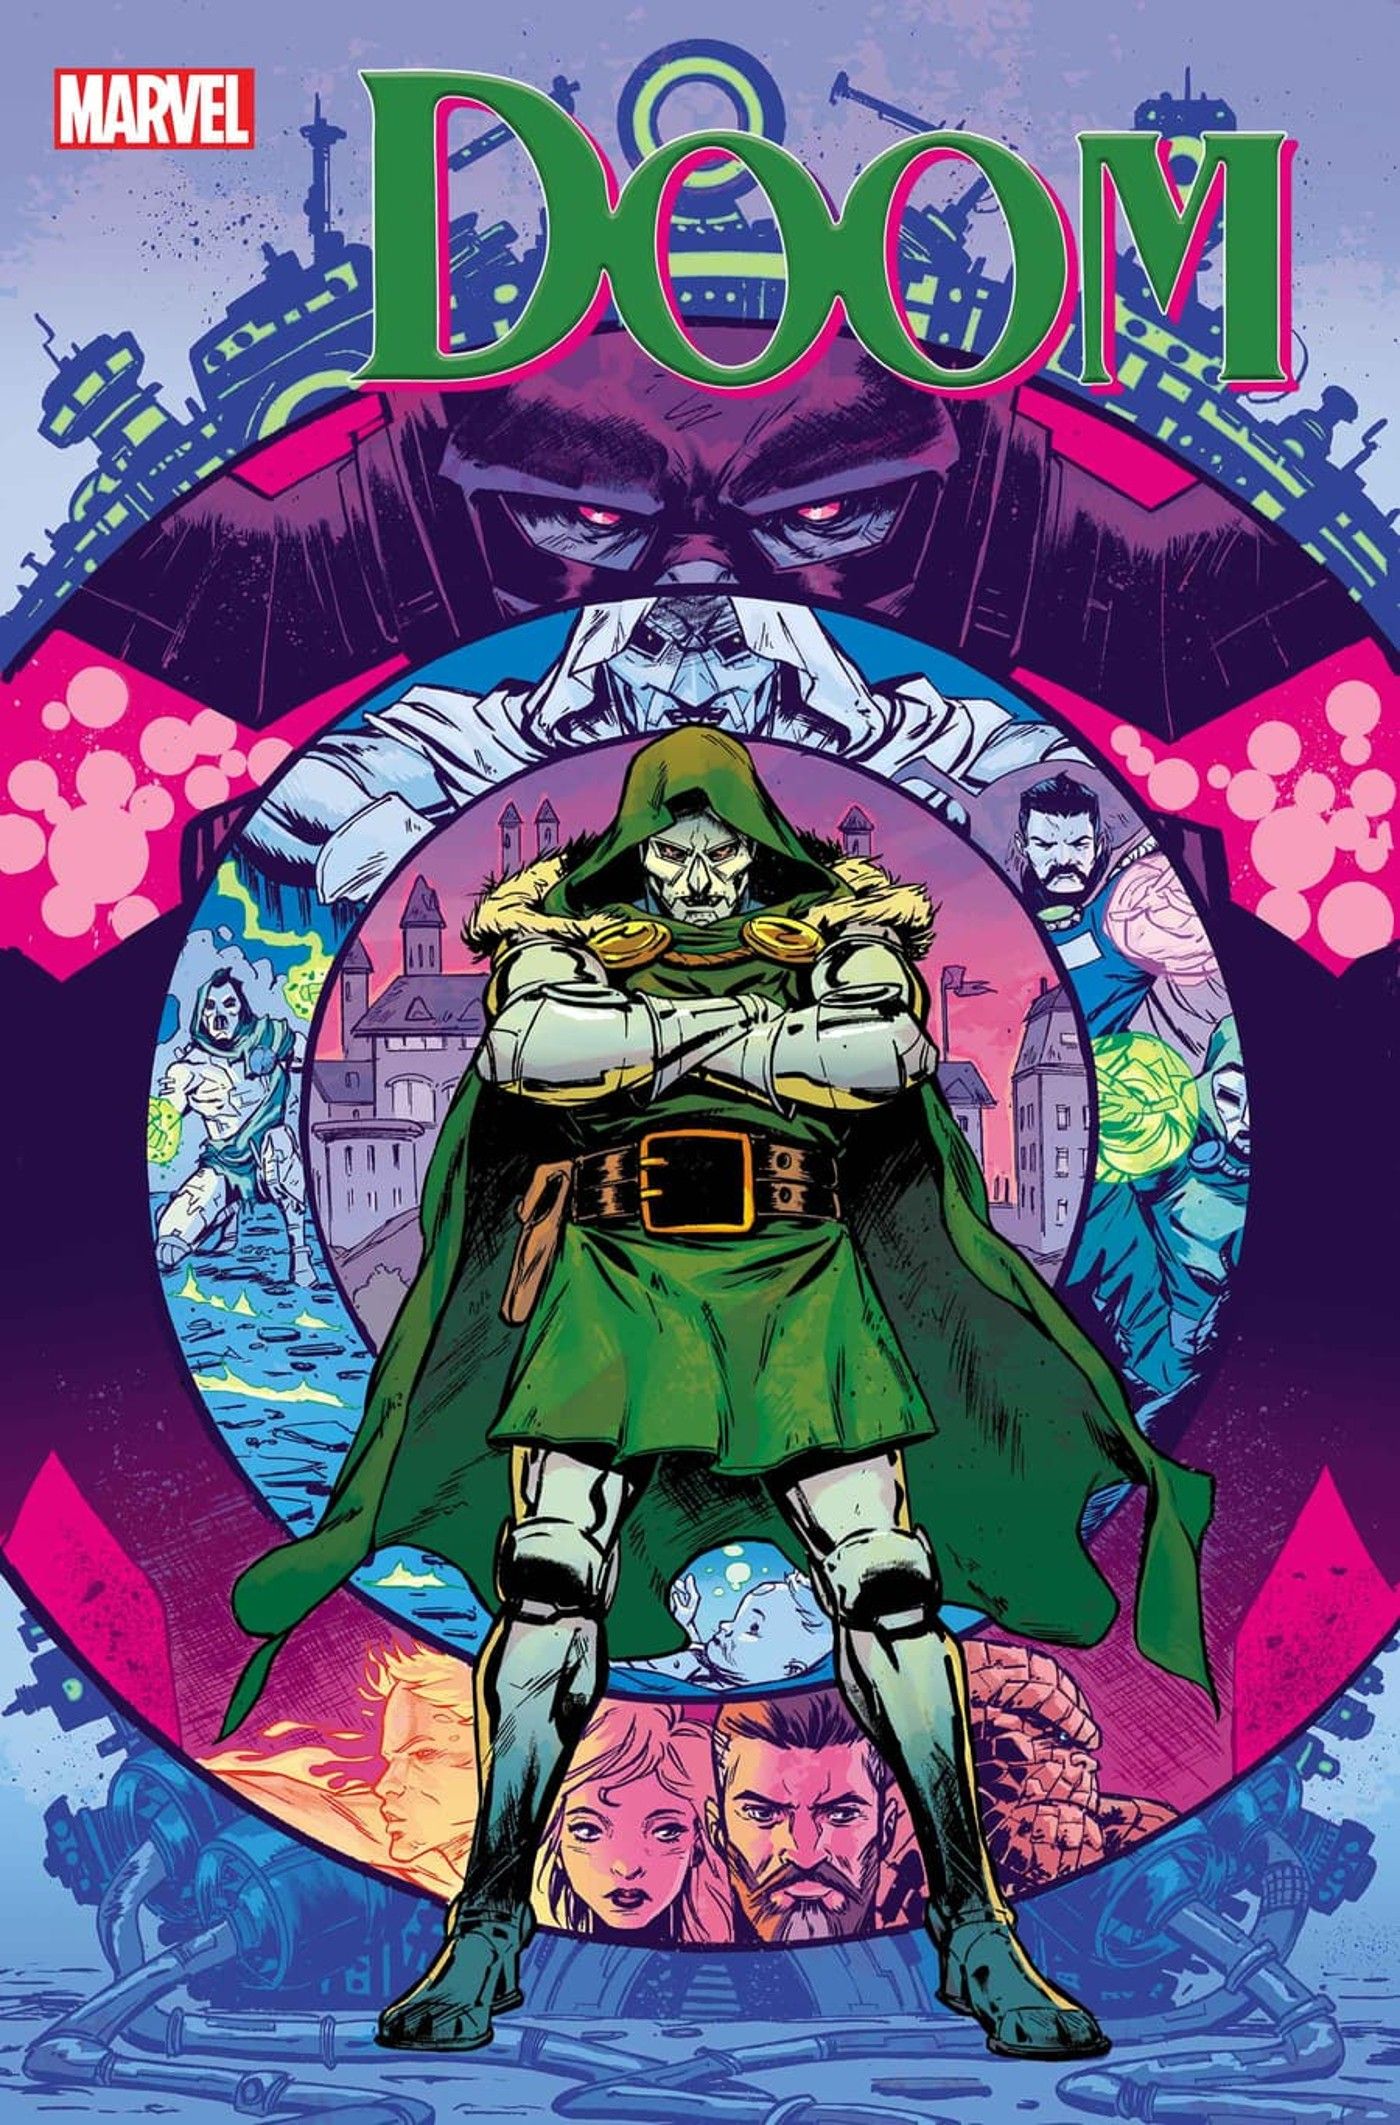 “More Power Than Any Human Has Ever Wielded”: Doctor Doom Becomes Most Powerful Human in Marvel History in Final Battle Against Galactus